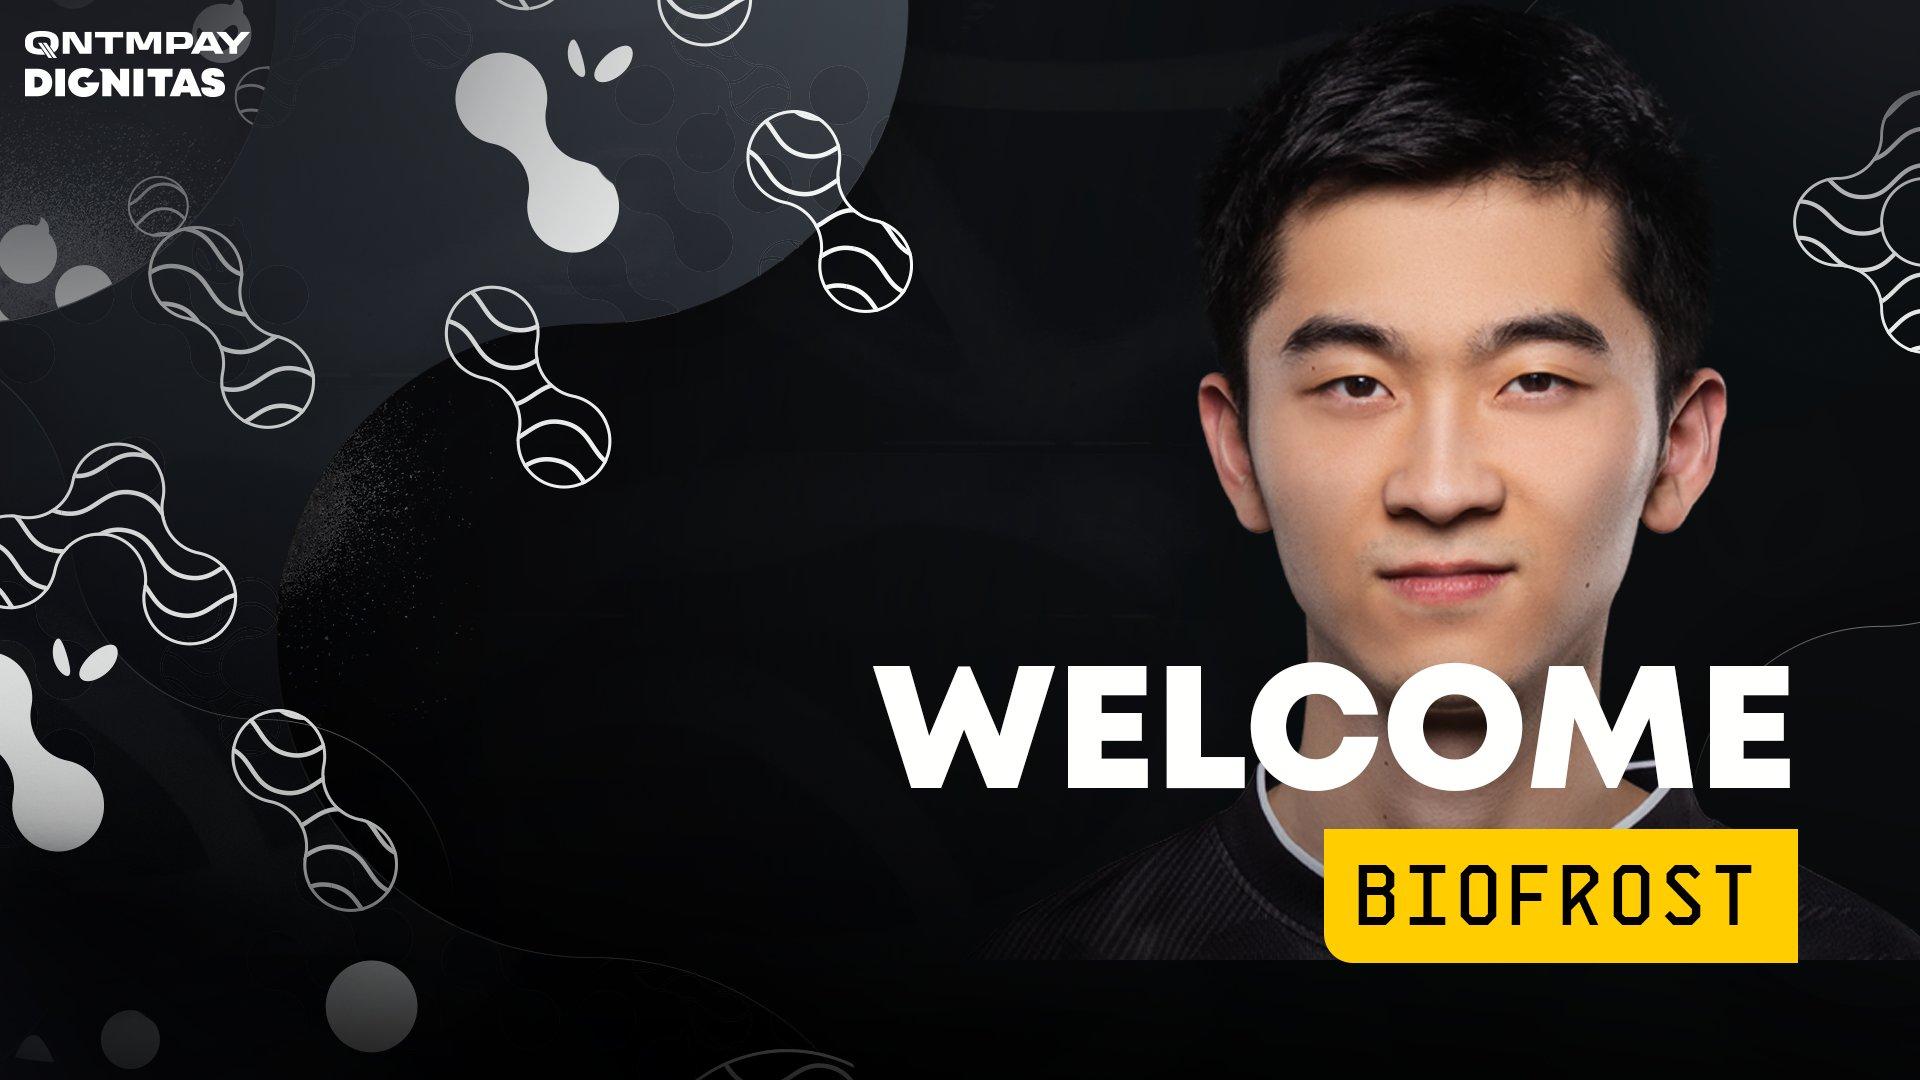 league of legends lol dignitas announcement for biofrost signing lcs